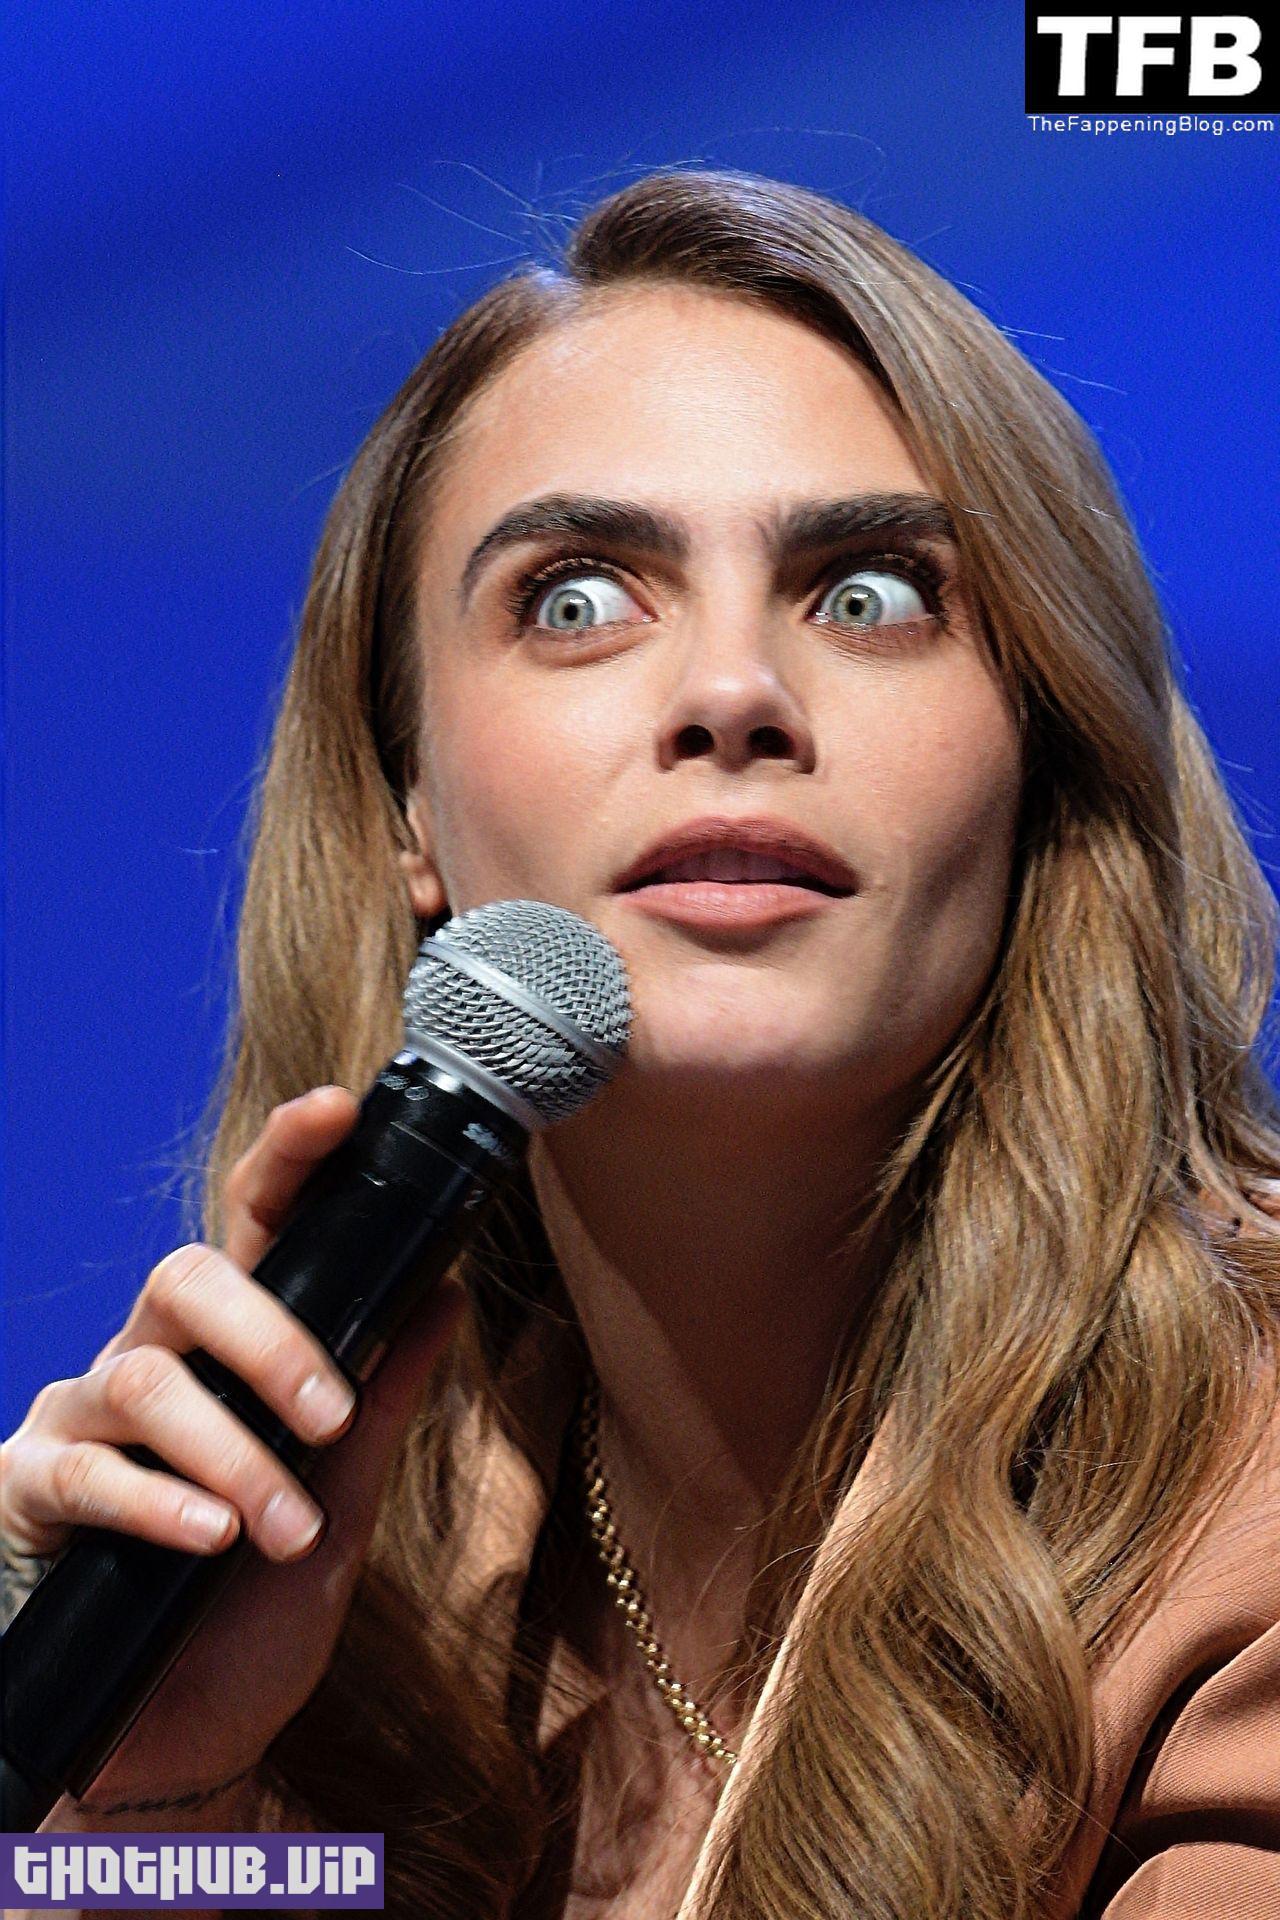 Cara Delevingne Sexy The Fappening Blog 28 2